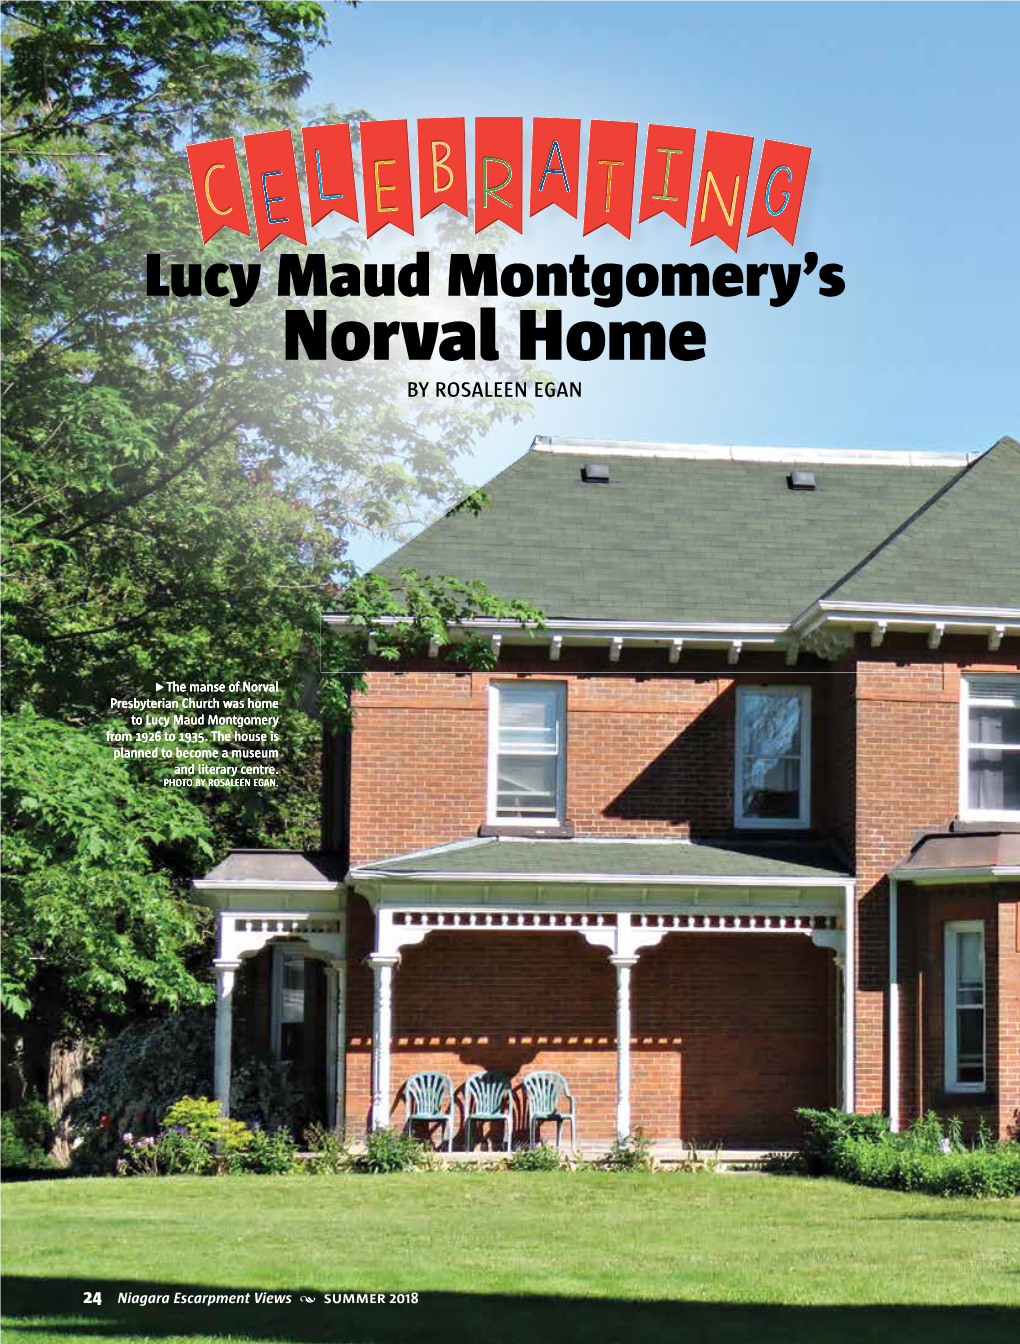 Celebrating Lucy Maud Montgomery's Norval Home